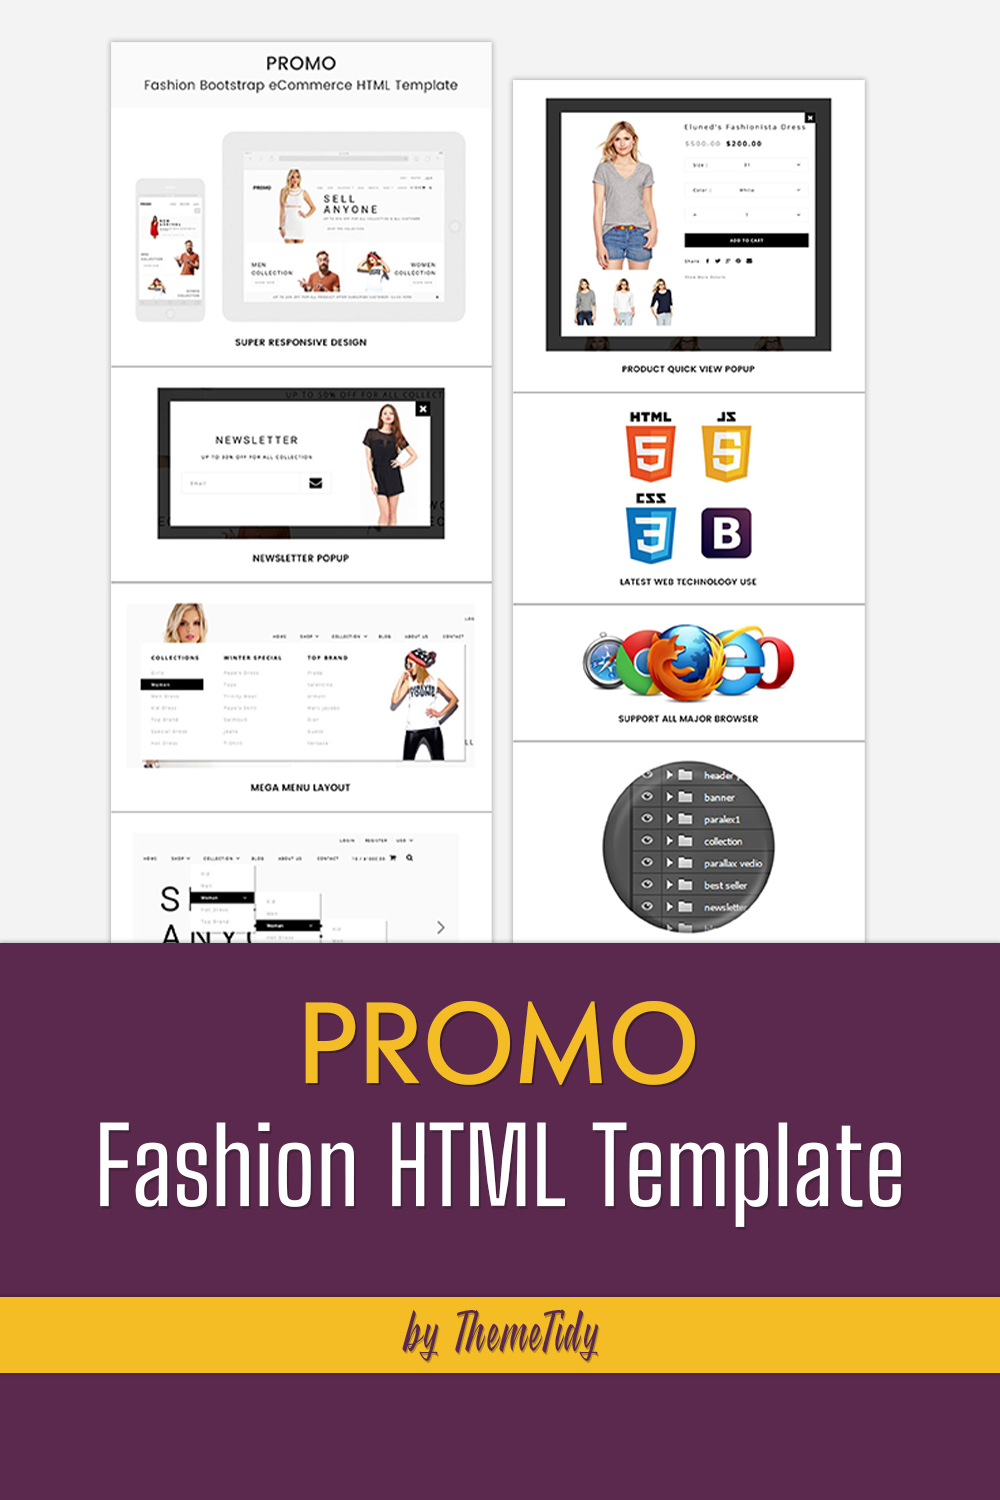 Promo fashion html template images of pinterest.